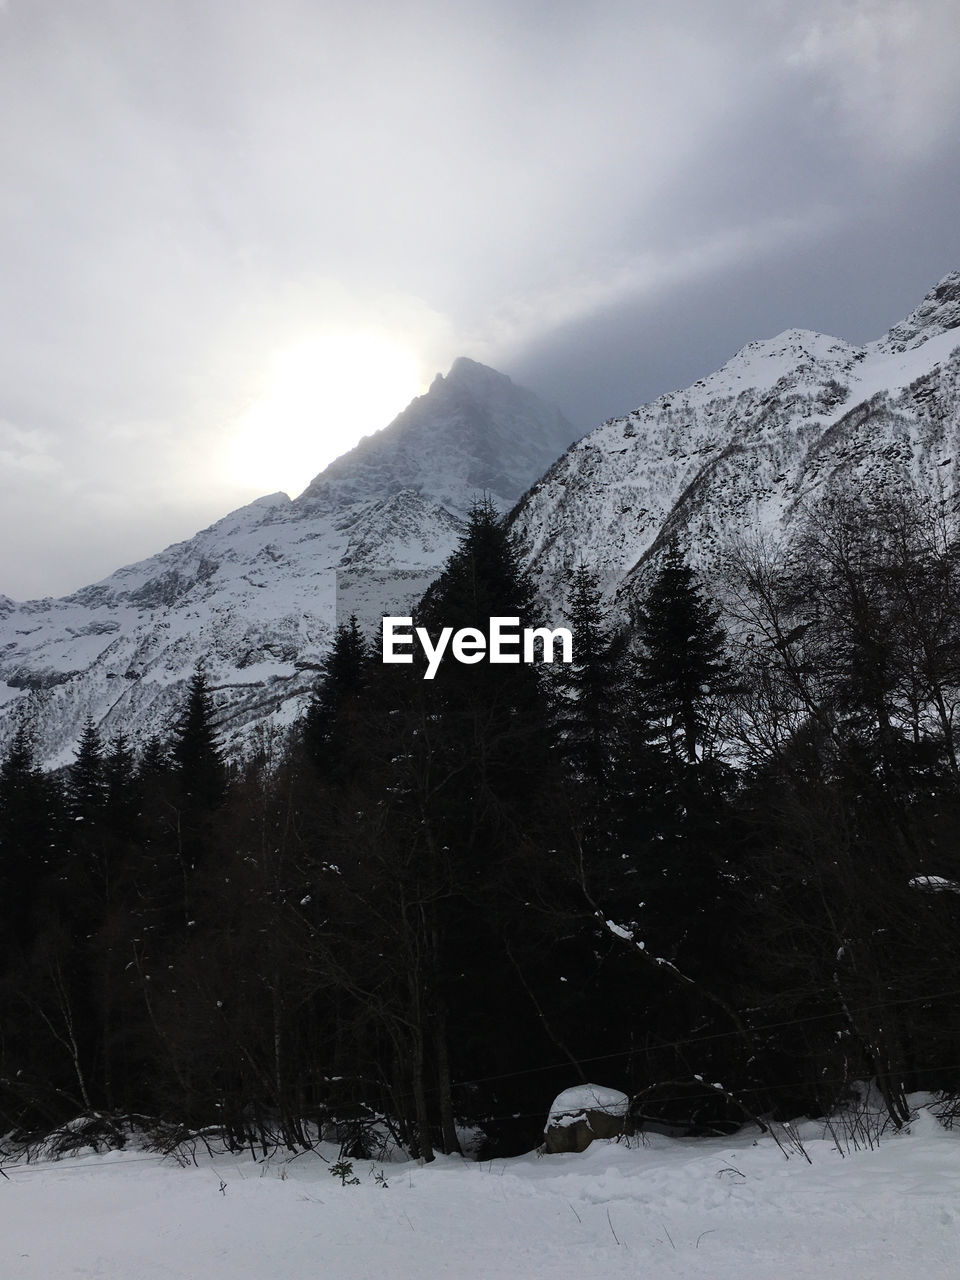 SCENIC VIEW OF SNOWCAPPED MOUNTAINS DURING WINTER